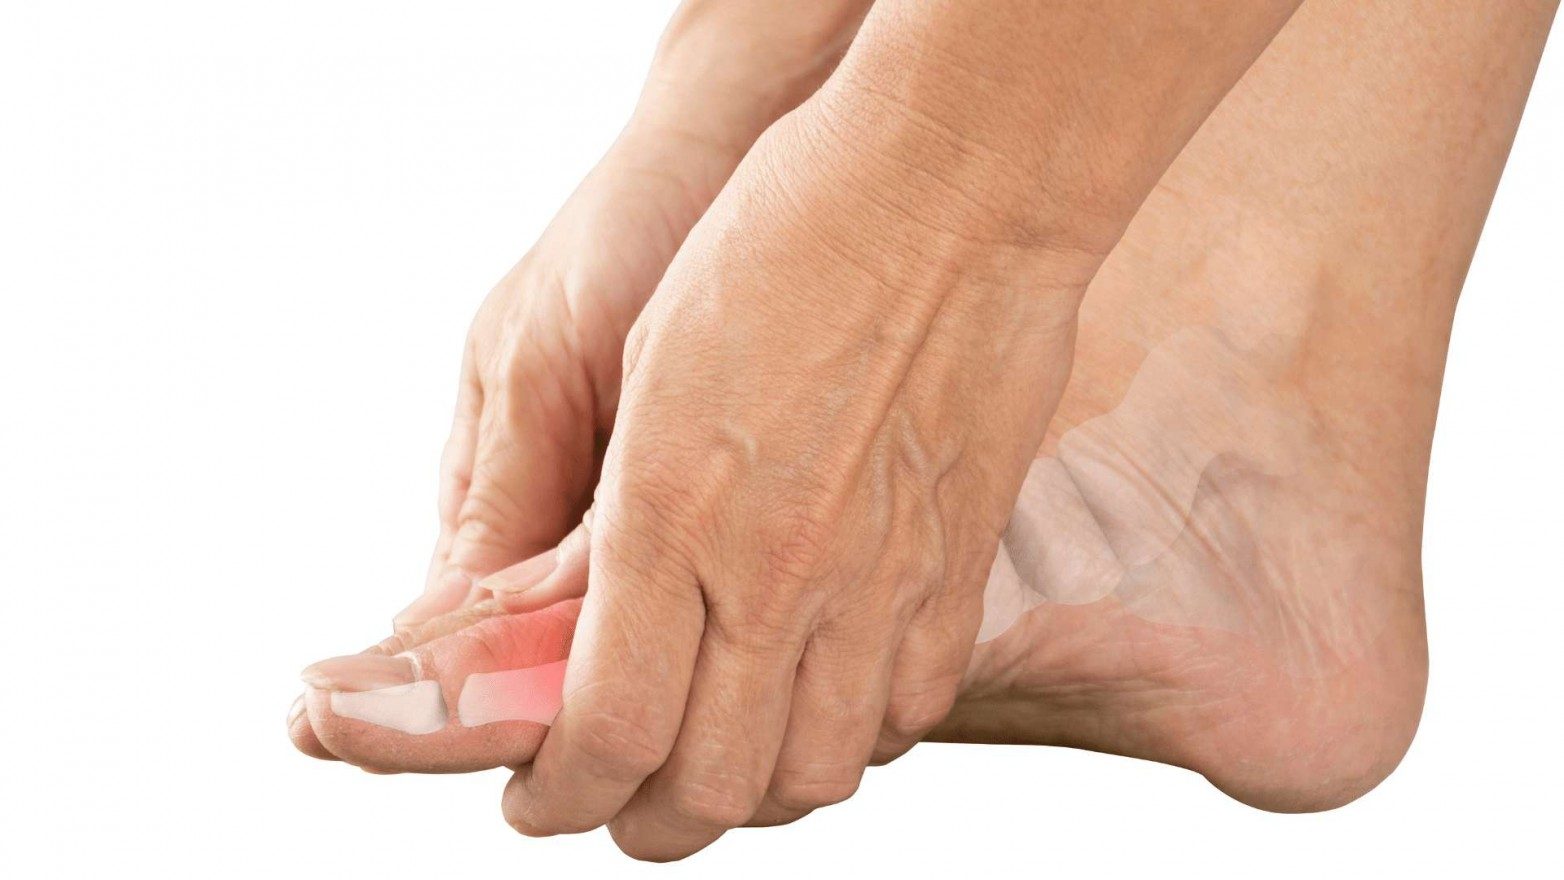 Hands holding a foot, shown from a side angle, that has a faint, vector foot bone showing 